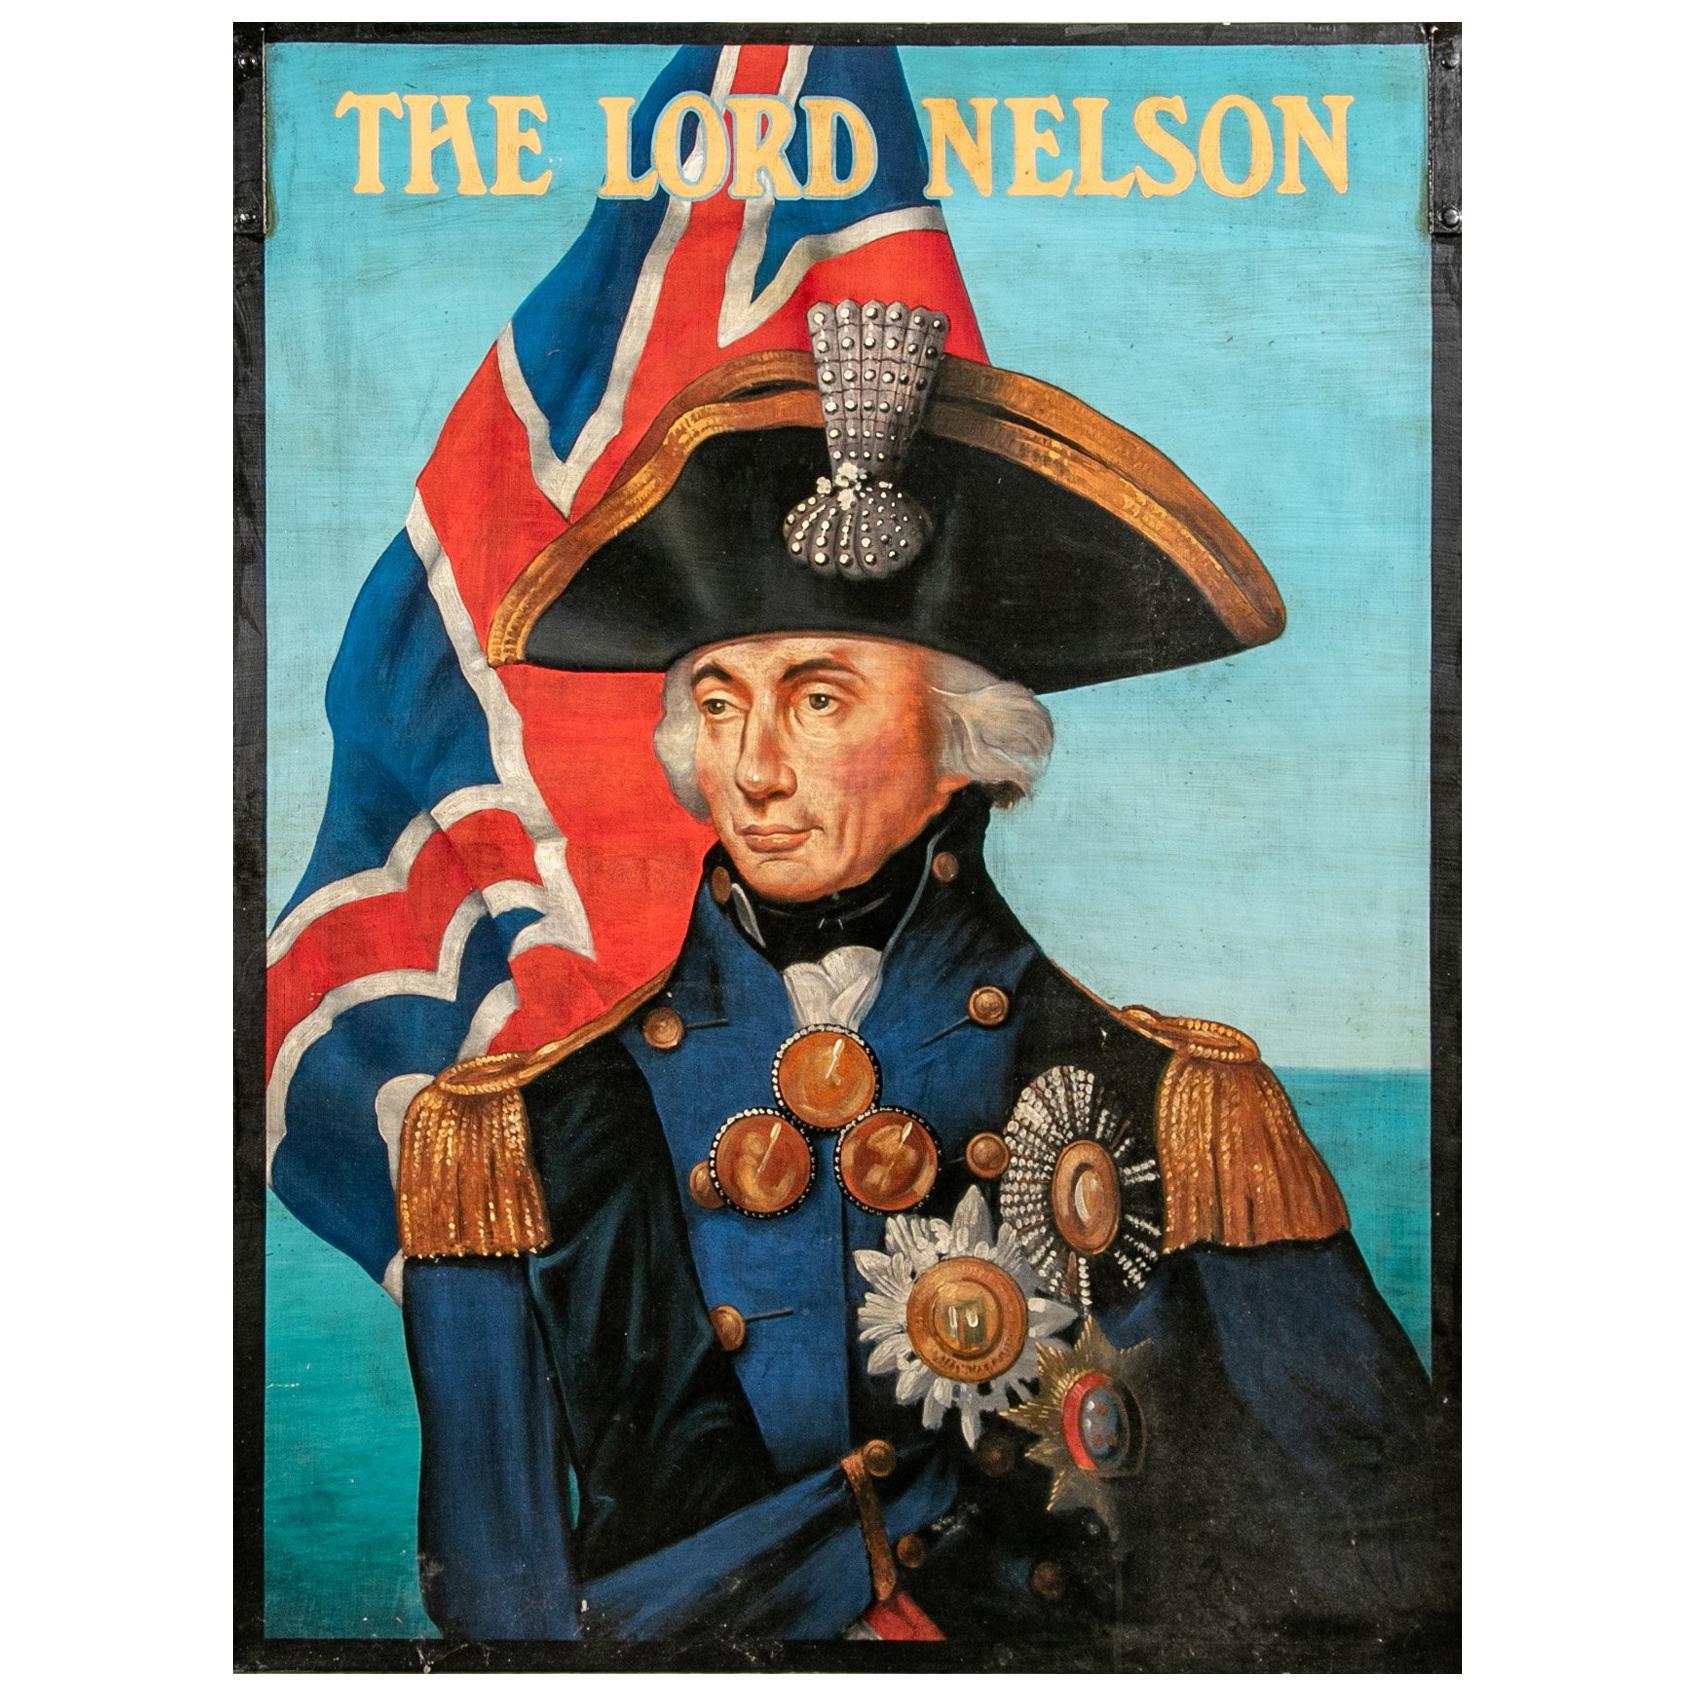 Vintage British Reproduction Pub Sign, "The Lord Nelson"